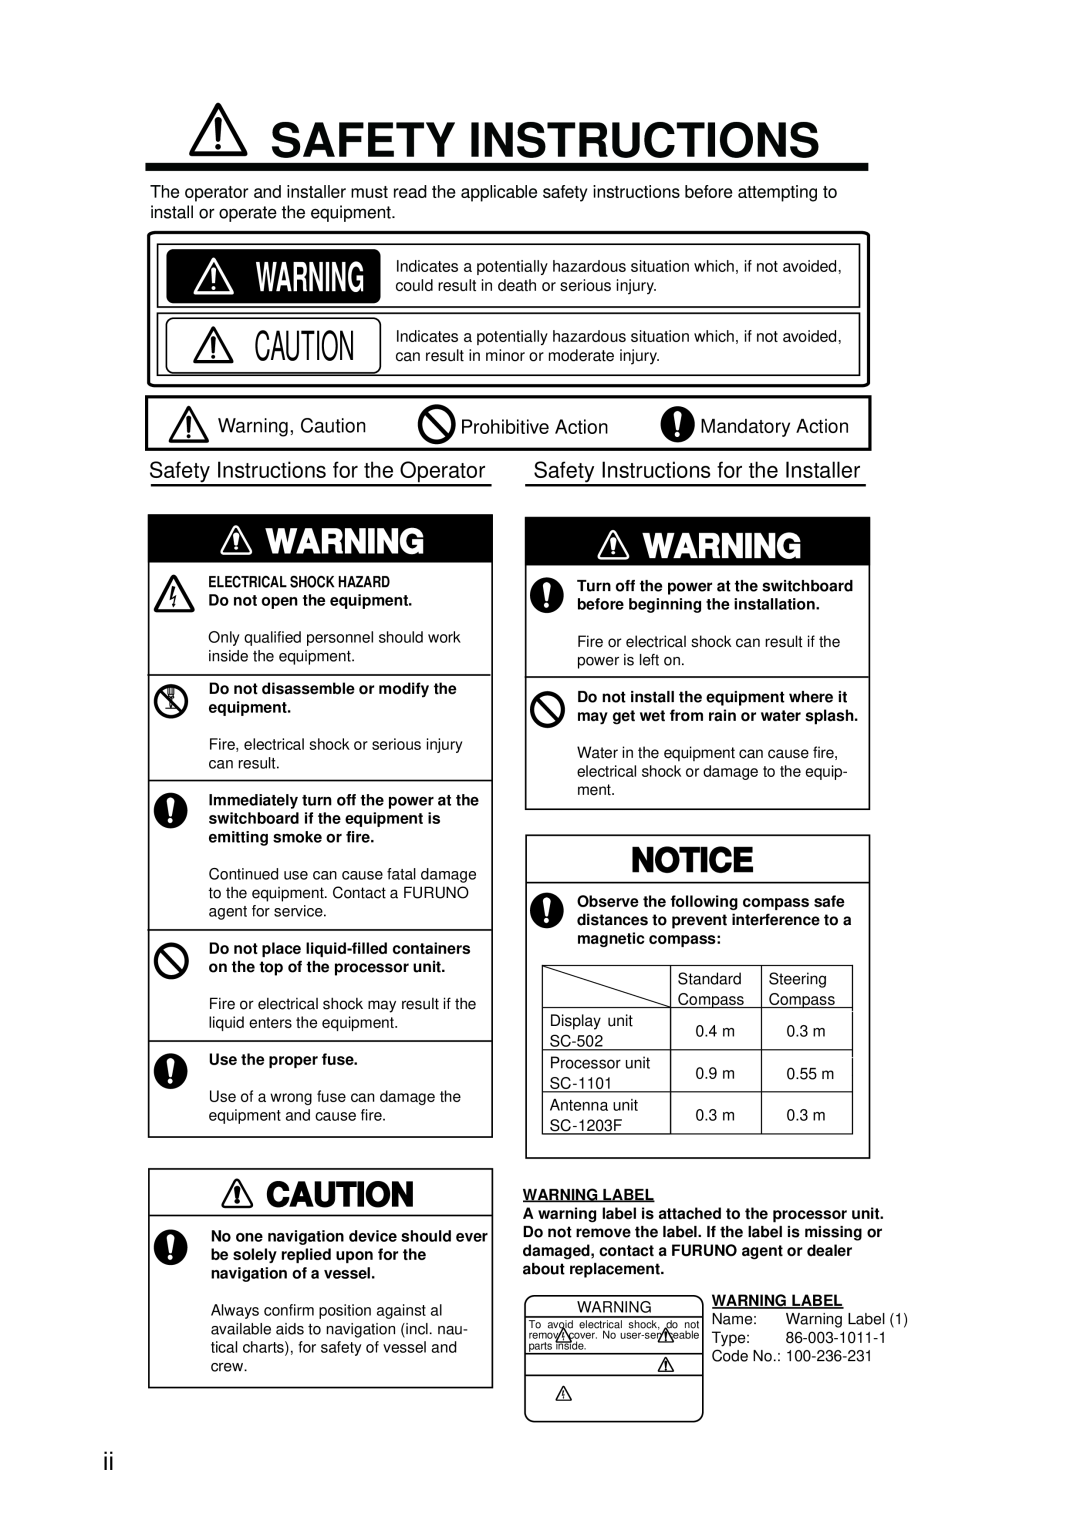 Furuno SC-110 manual Safety Instructions for the Operator, Safety Instructions for the Installer, Warning, Caution 